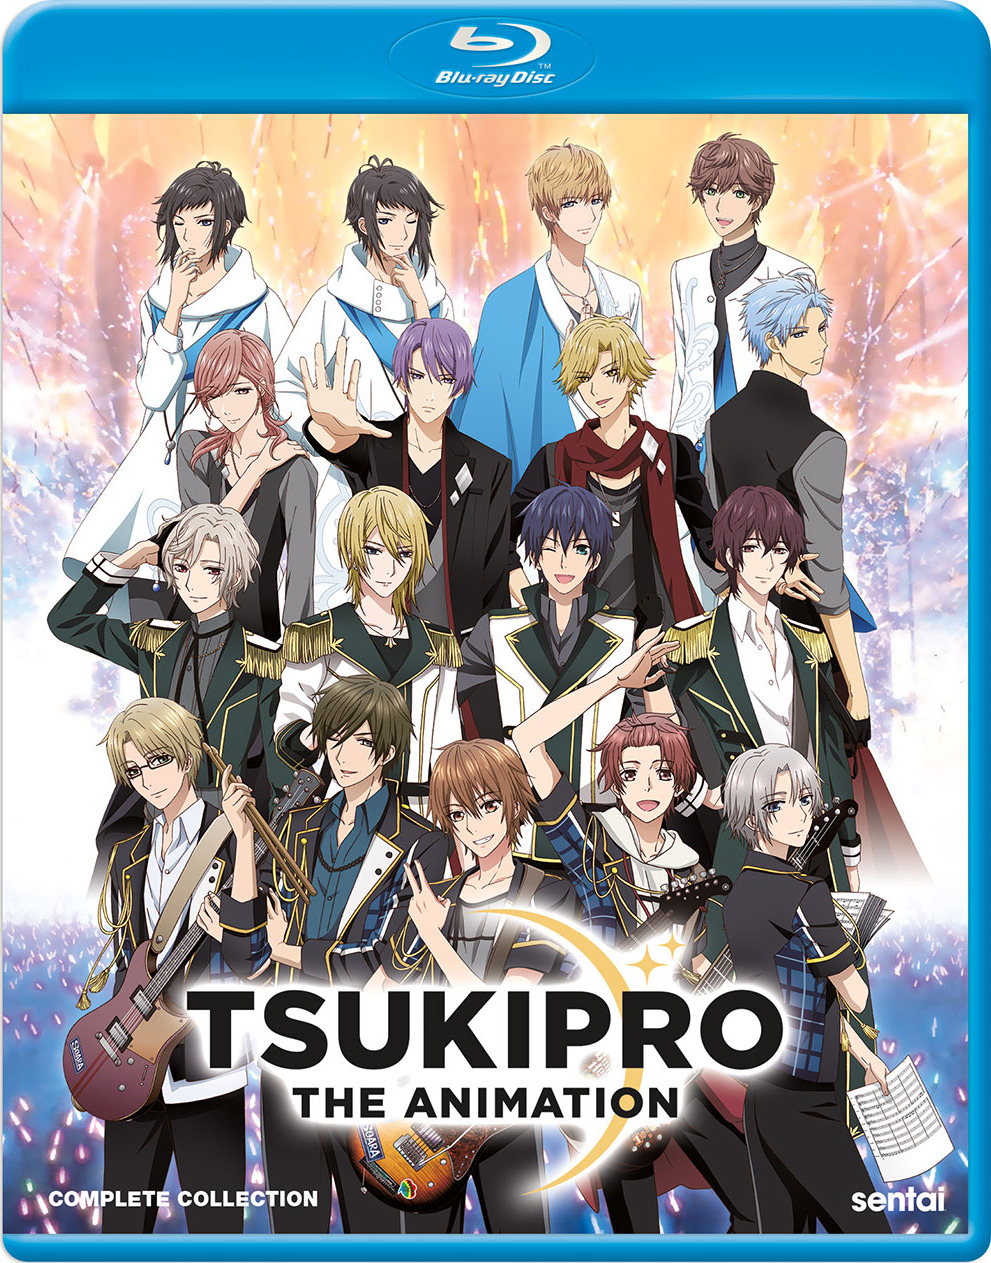 Tsukipro the Animation: Complete Collection Blu-ray